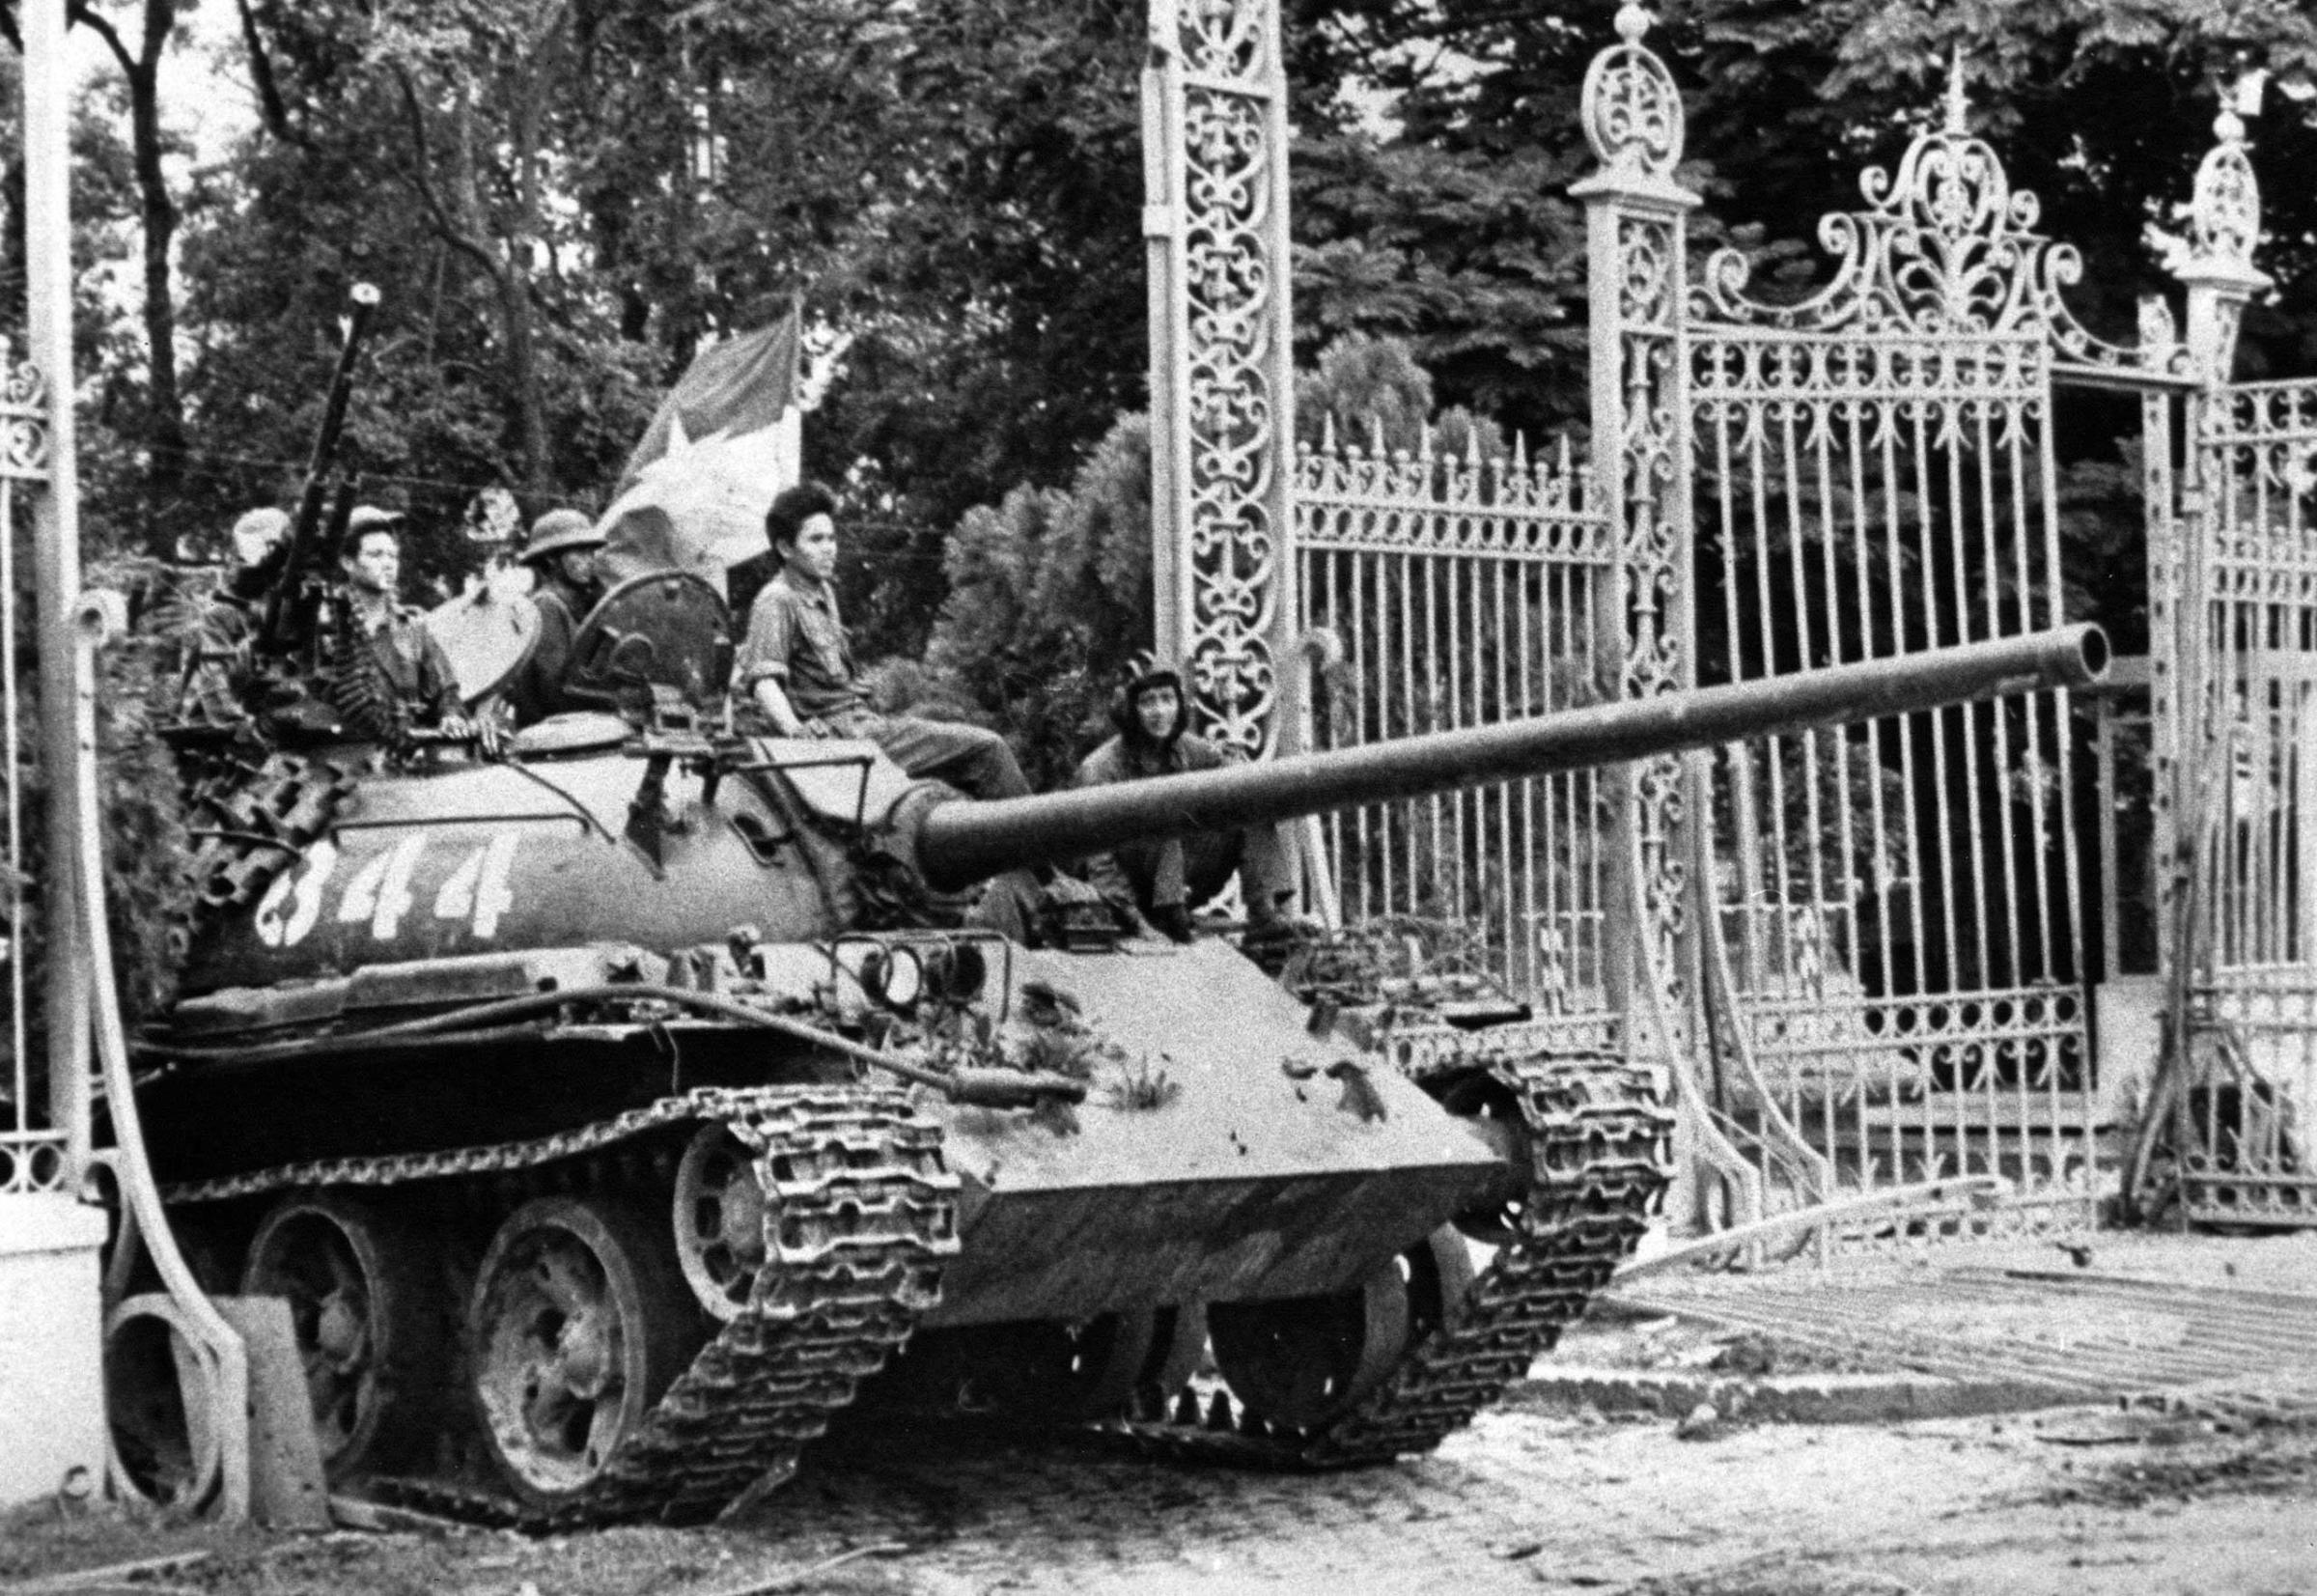 A North Vietnamese tank rolls through the gates of the Presidential Palace in Saigon, signifying the fall of South Vietnam, on April 30, 1975.